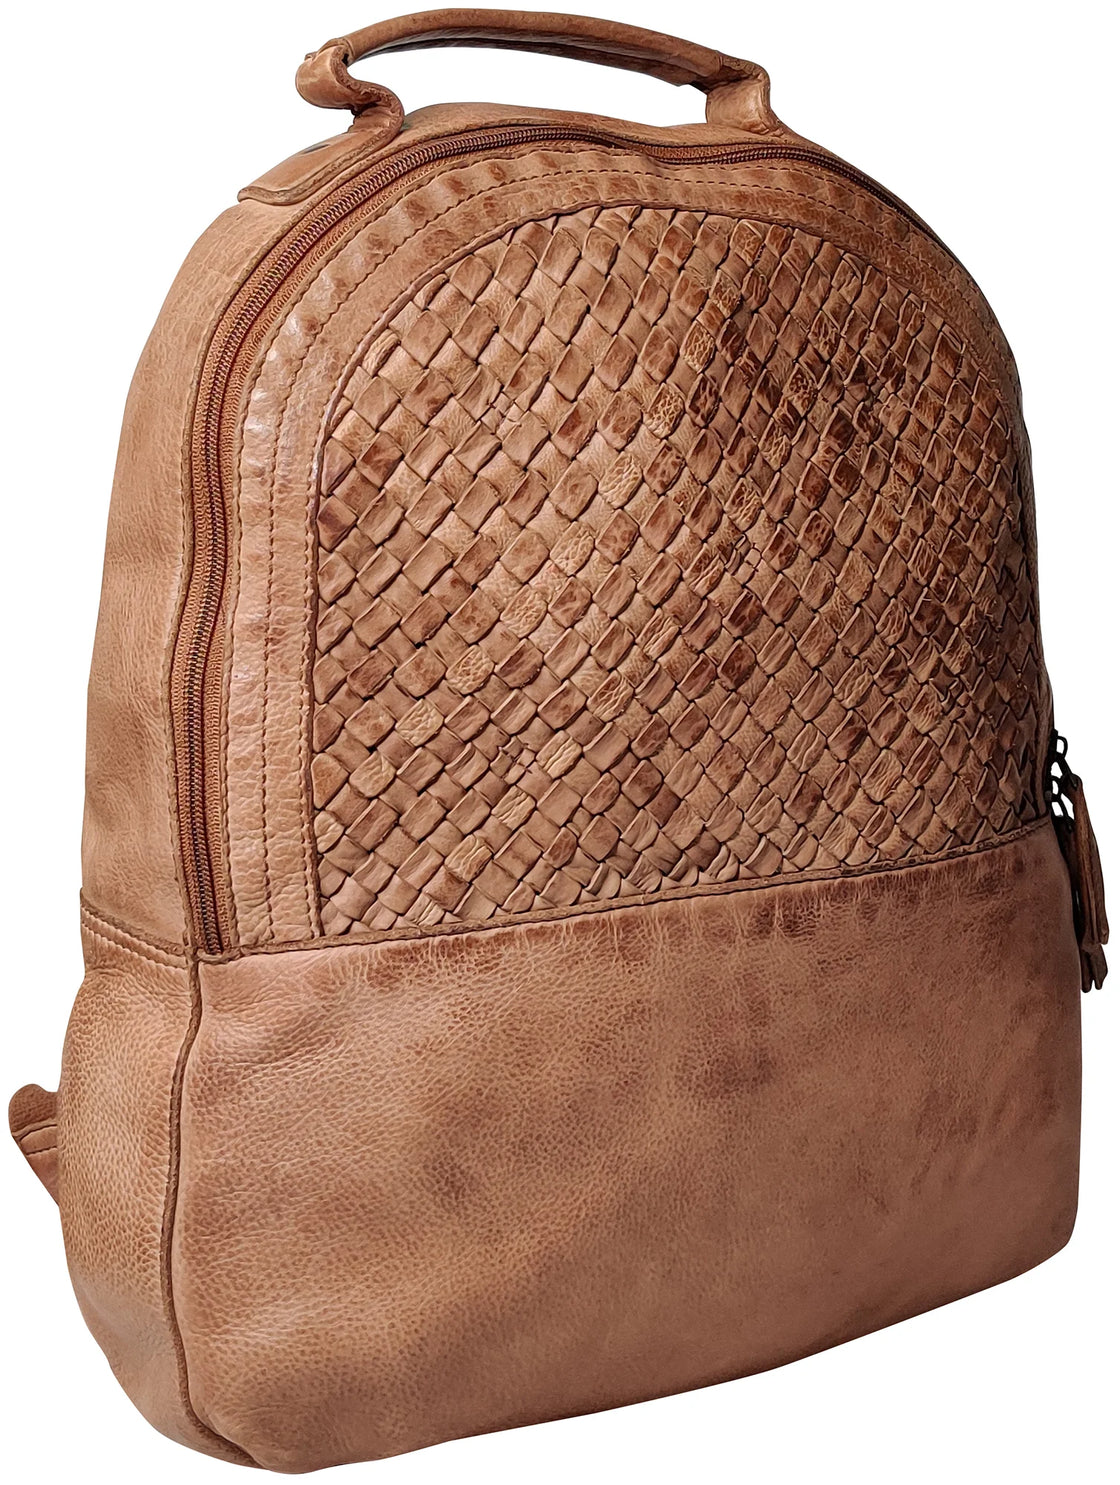 Leather Backpack for girls